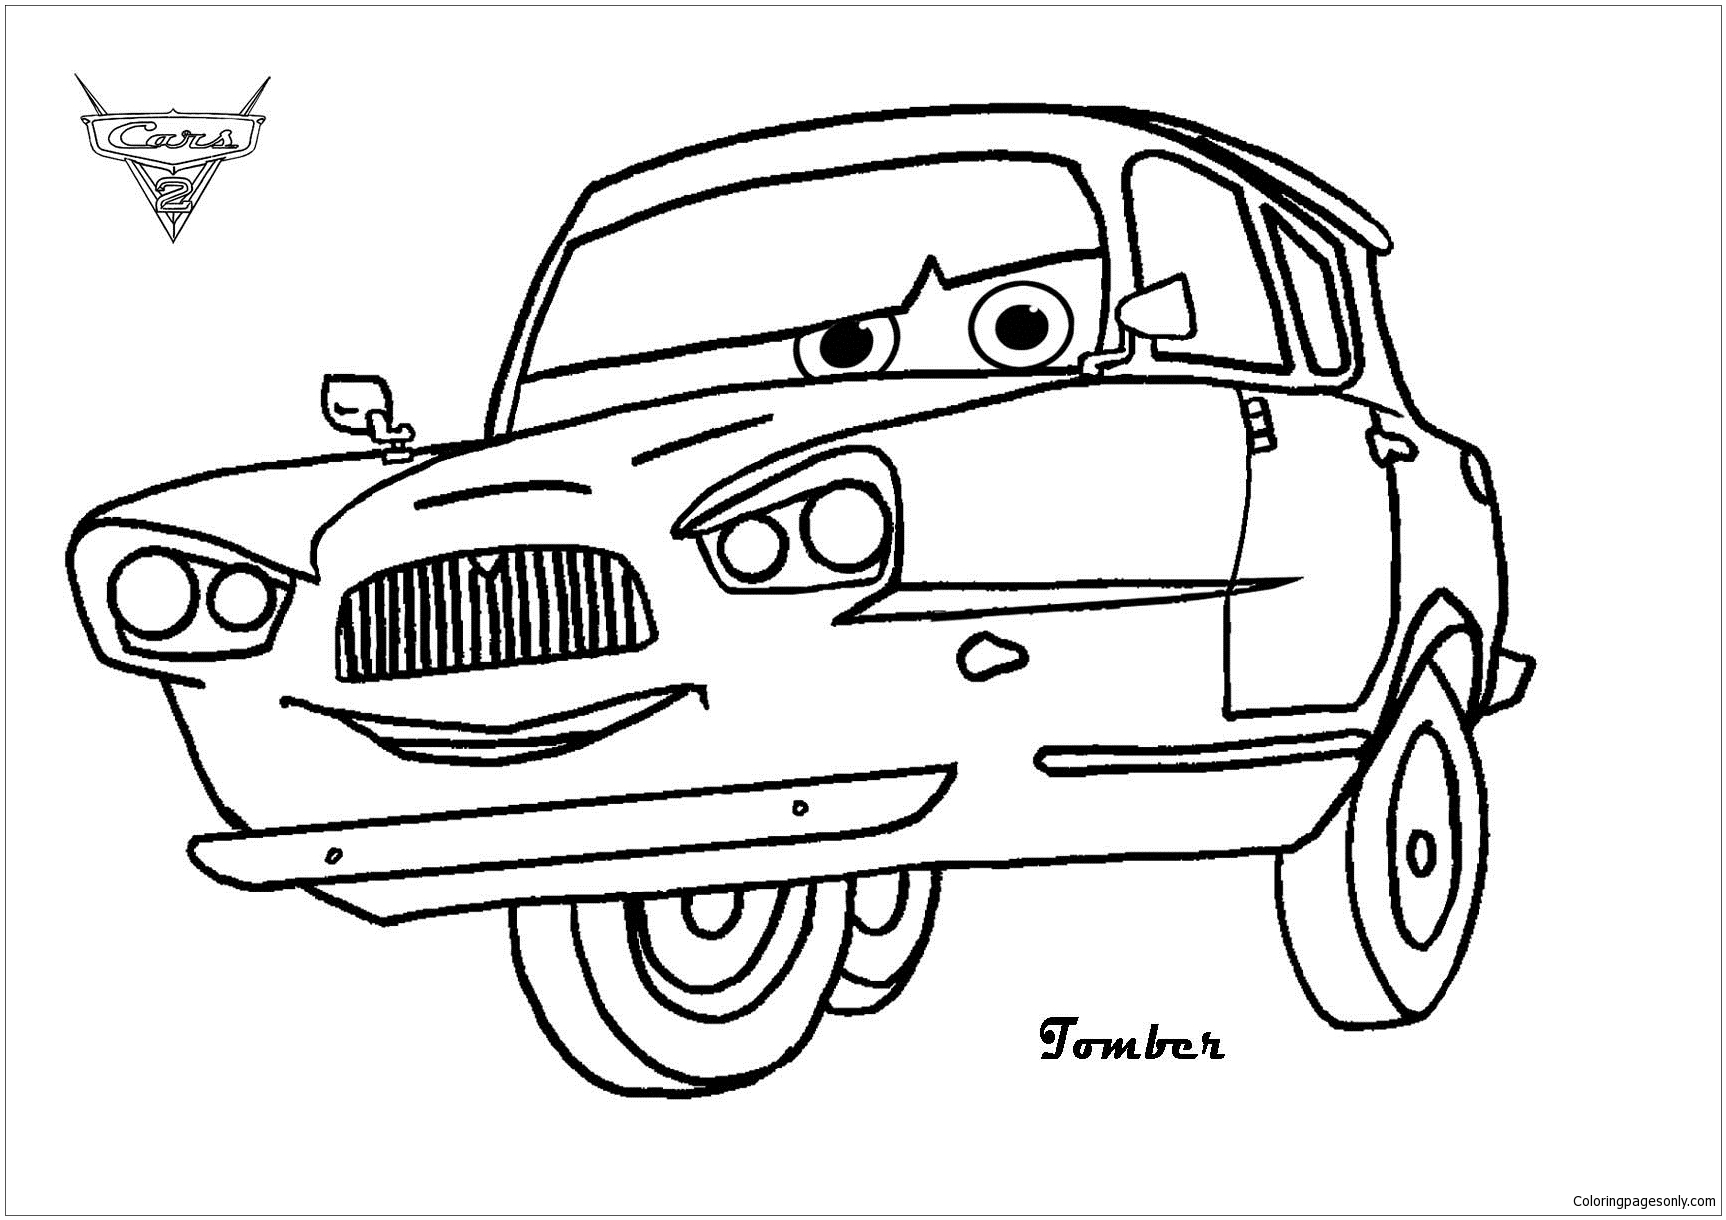 Disney Cars 2 5 Coloring Pages - Cartoons Coloring Pages - Coloring